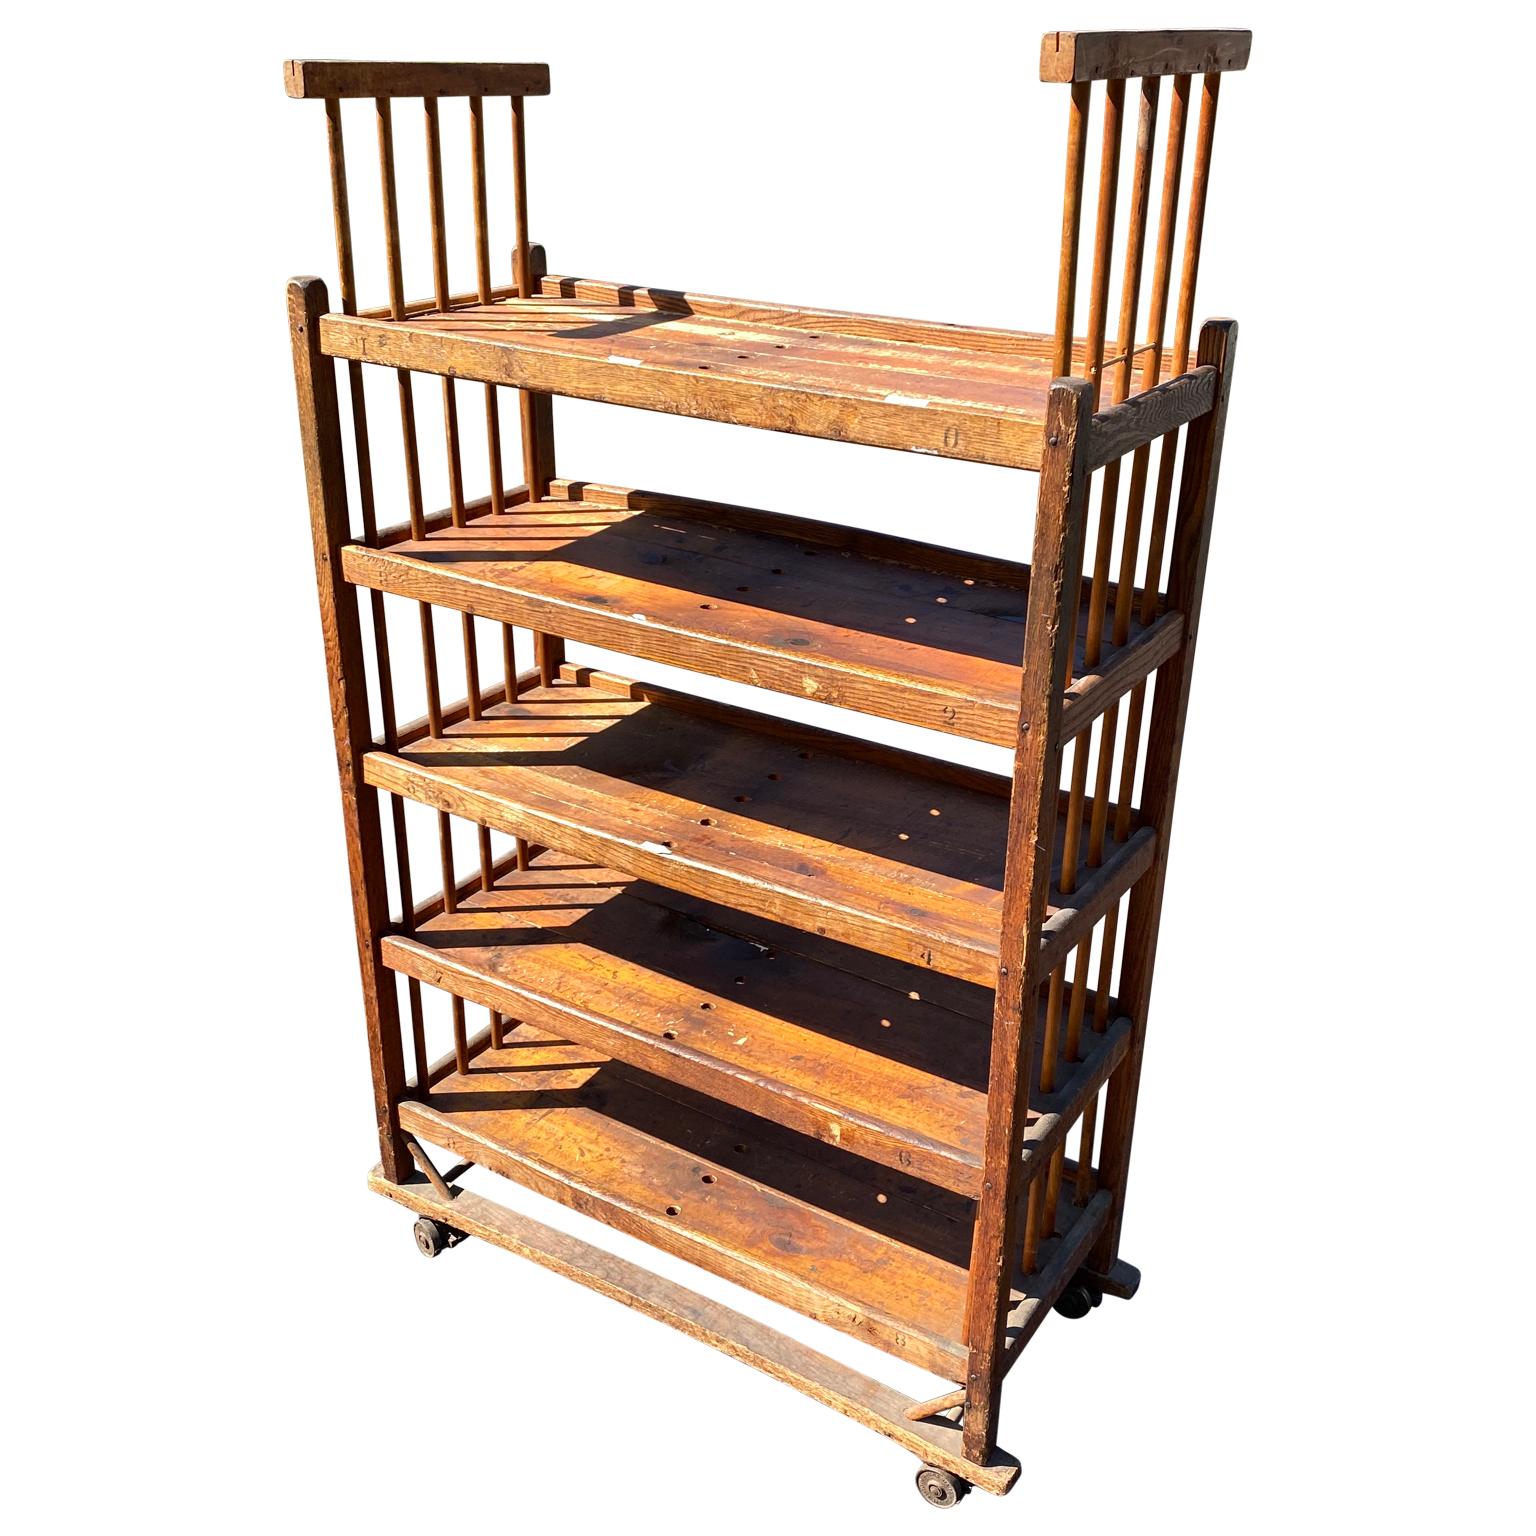 American 1930s wooden shelf, cart or bread rack on industrial iron wheels, with 5 shelves.
 